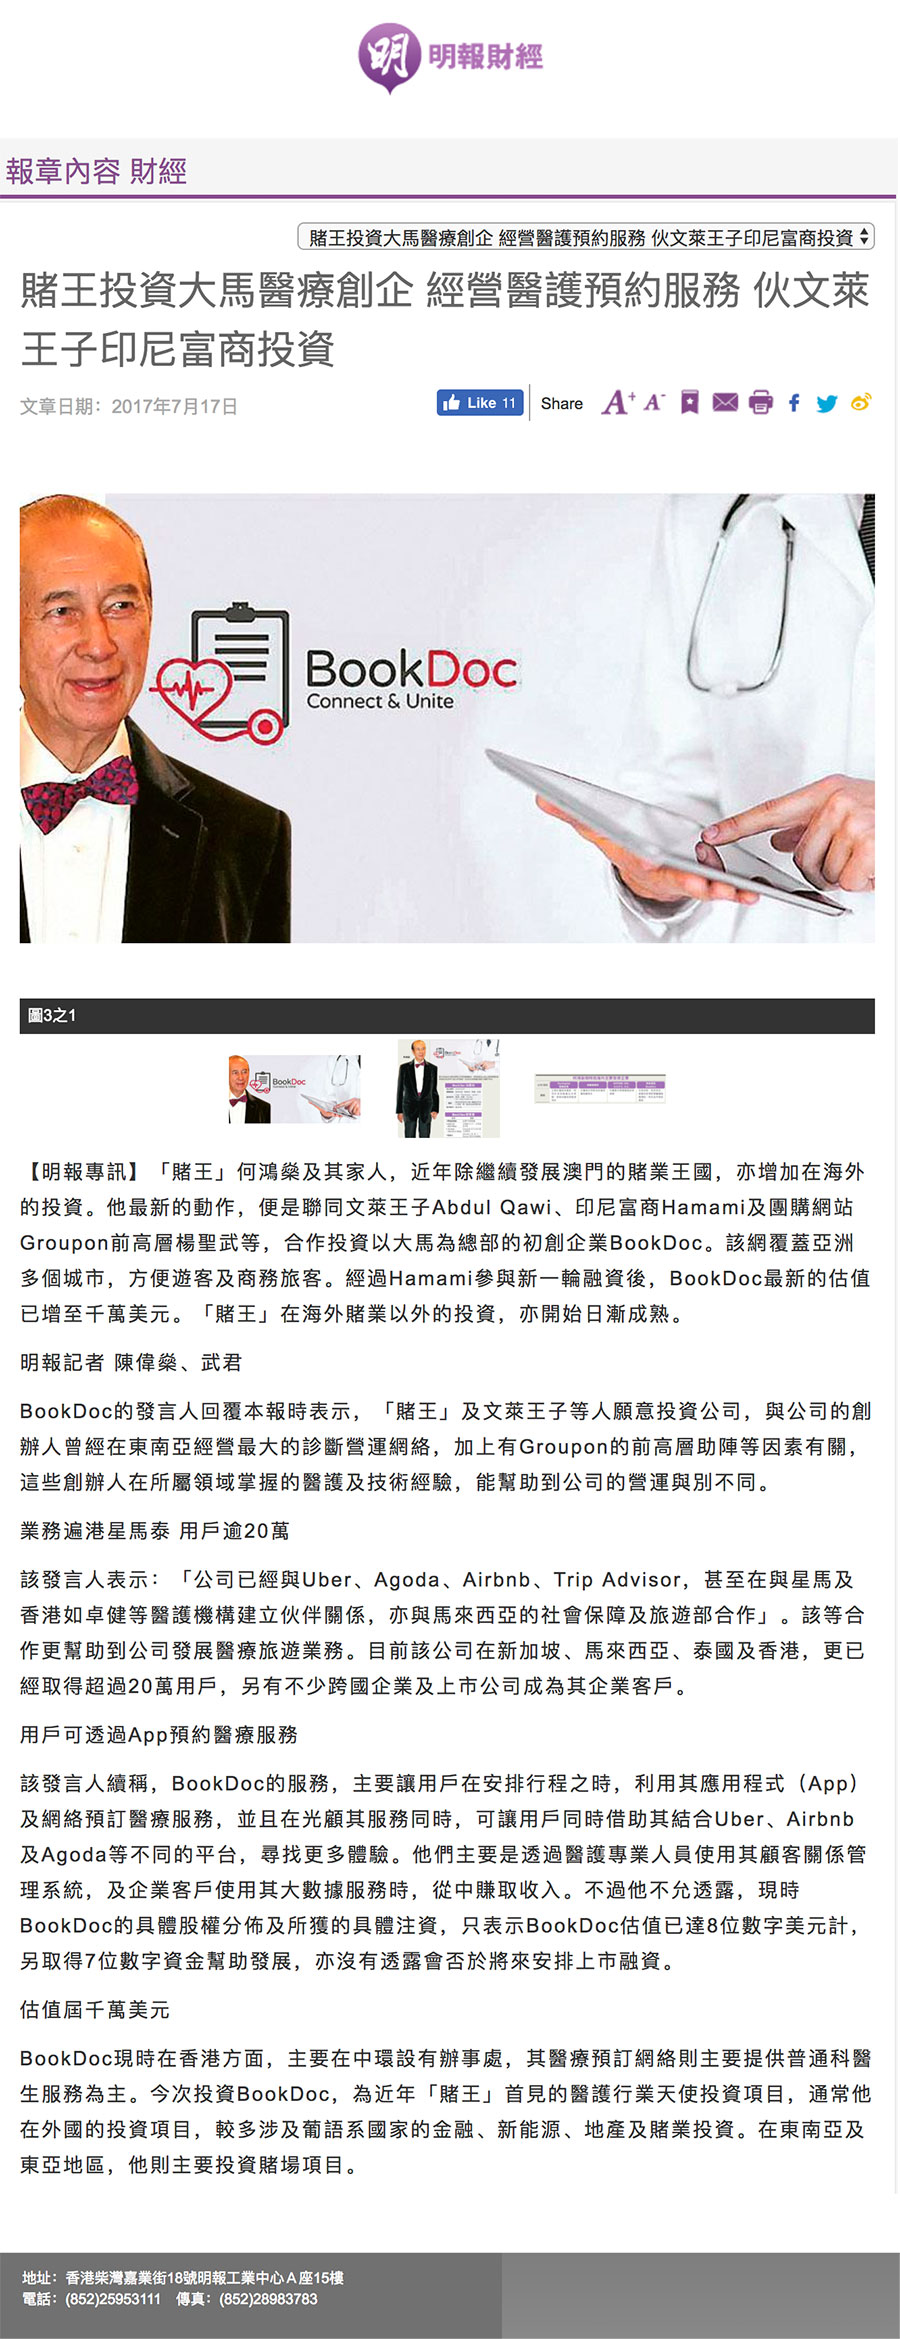 BookDoc featured on Ming Pao of Hong Kong